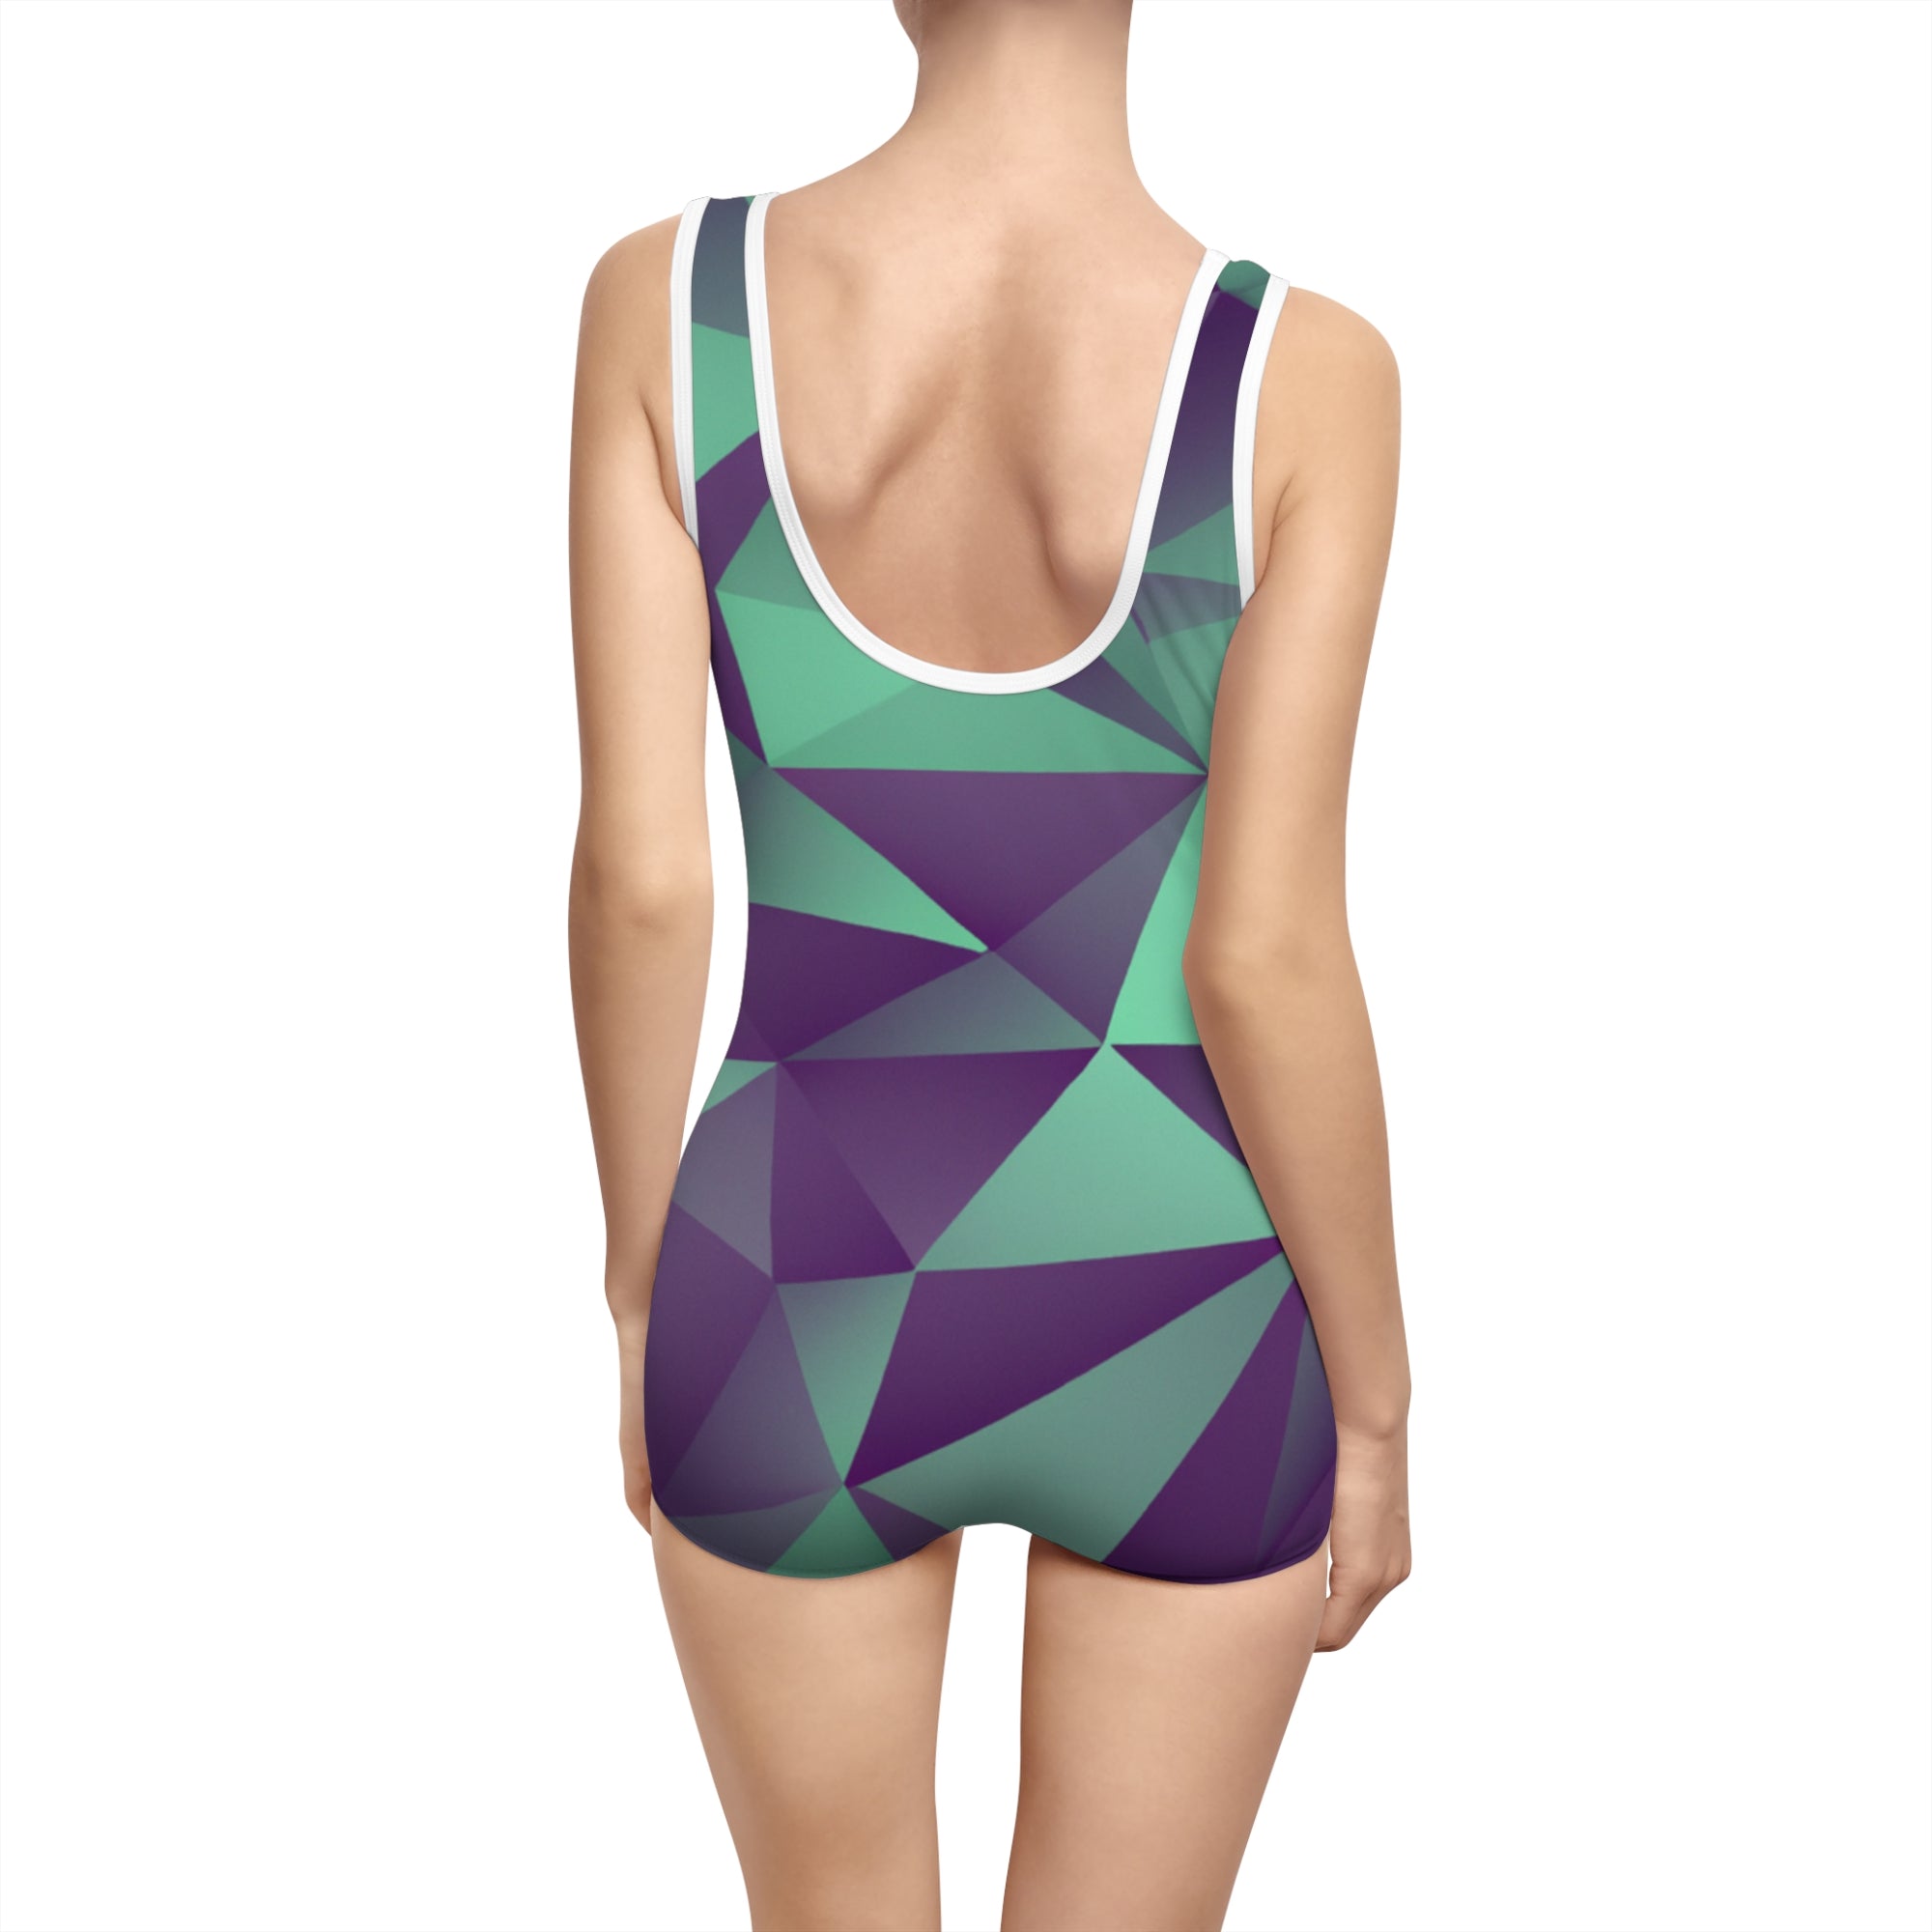 "Live Well" - Swimsuit Vintage